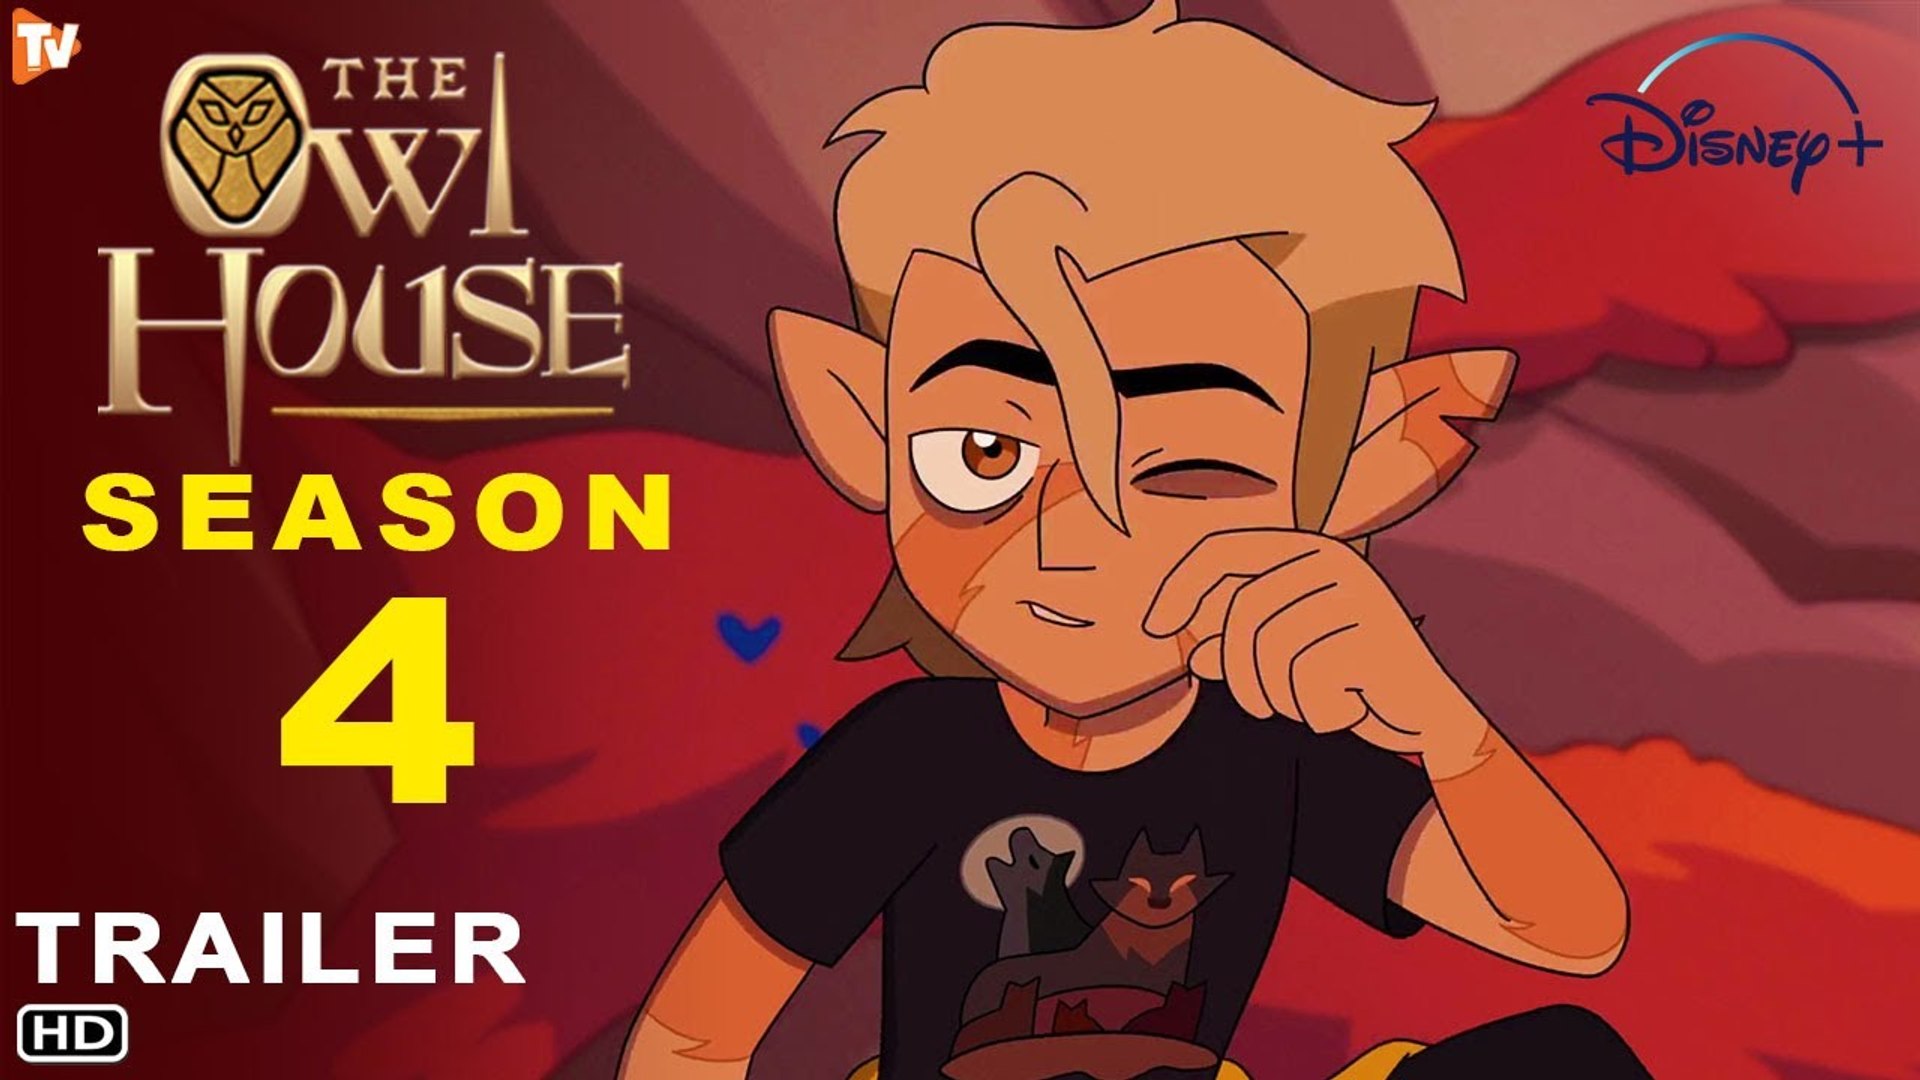 The Owl House Season 3 Special Shares First Trailer